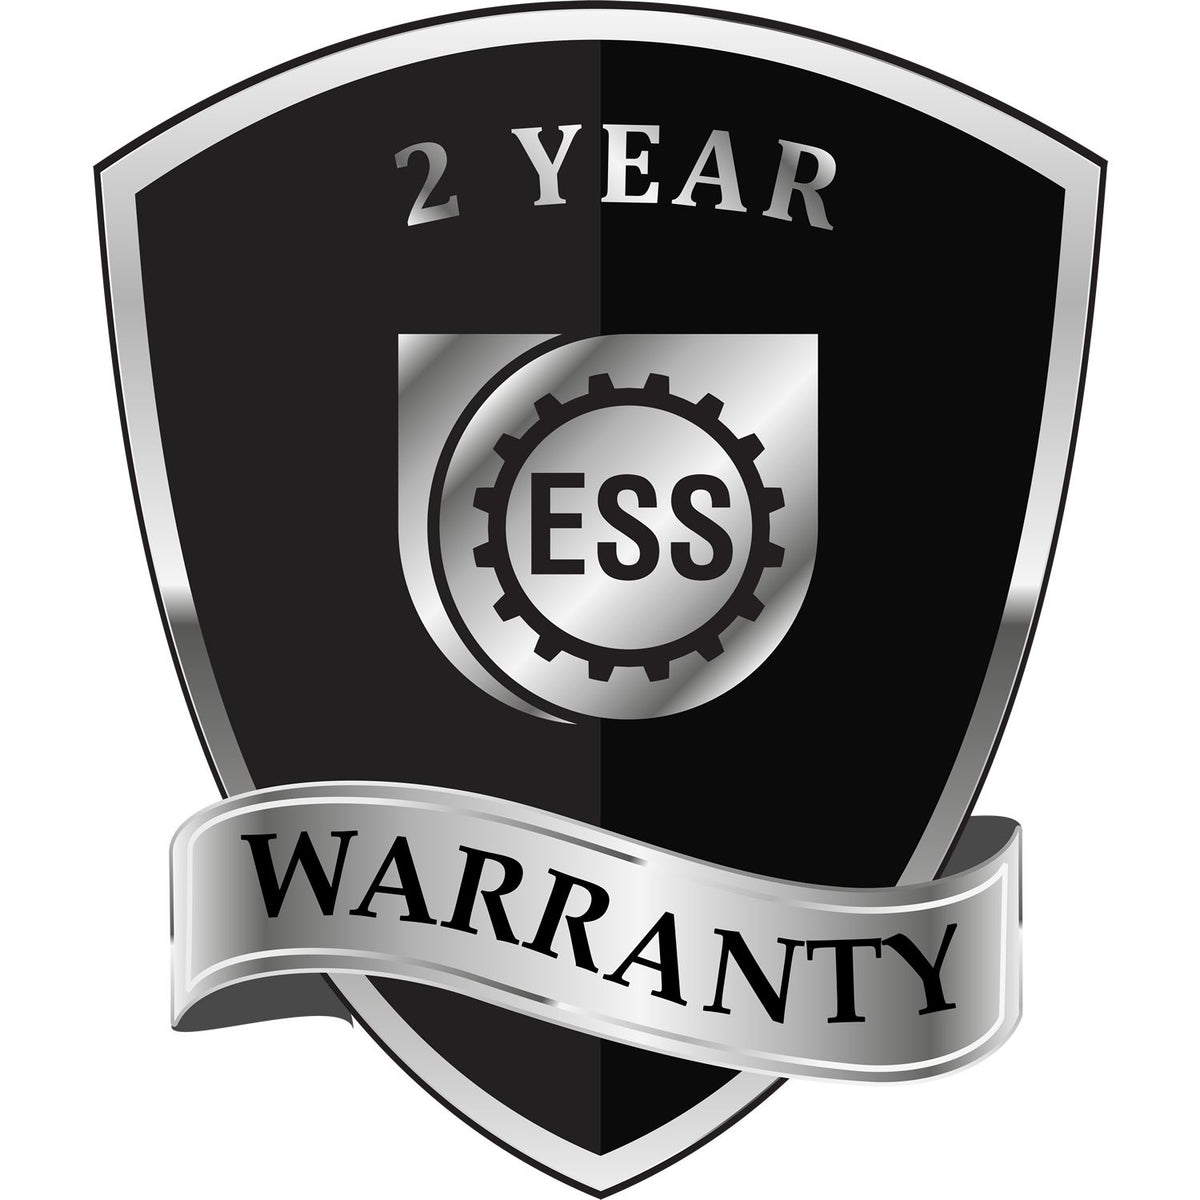 A badge or emblem showing a warranty icon for the Long Reach Michigan PE Seal